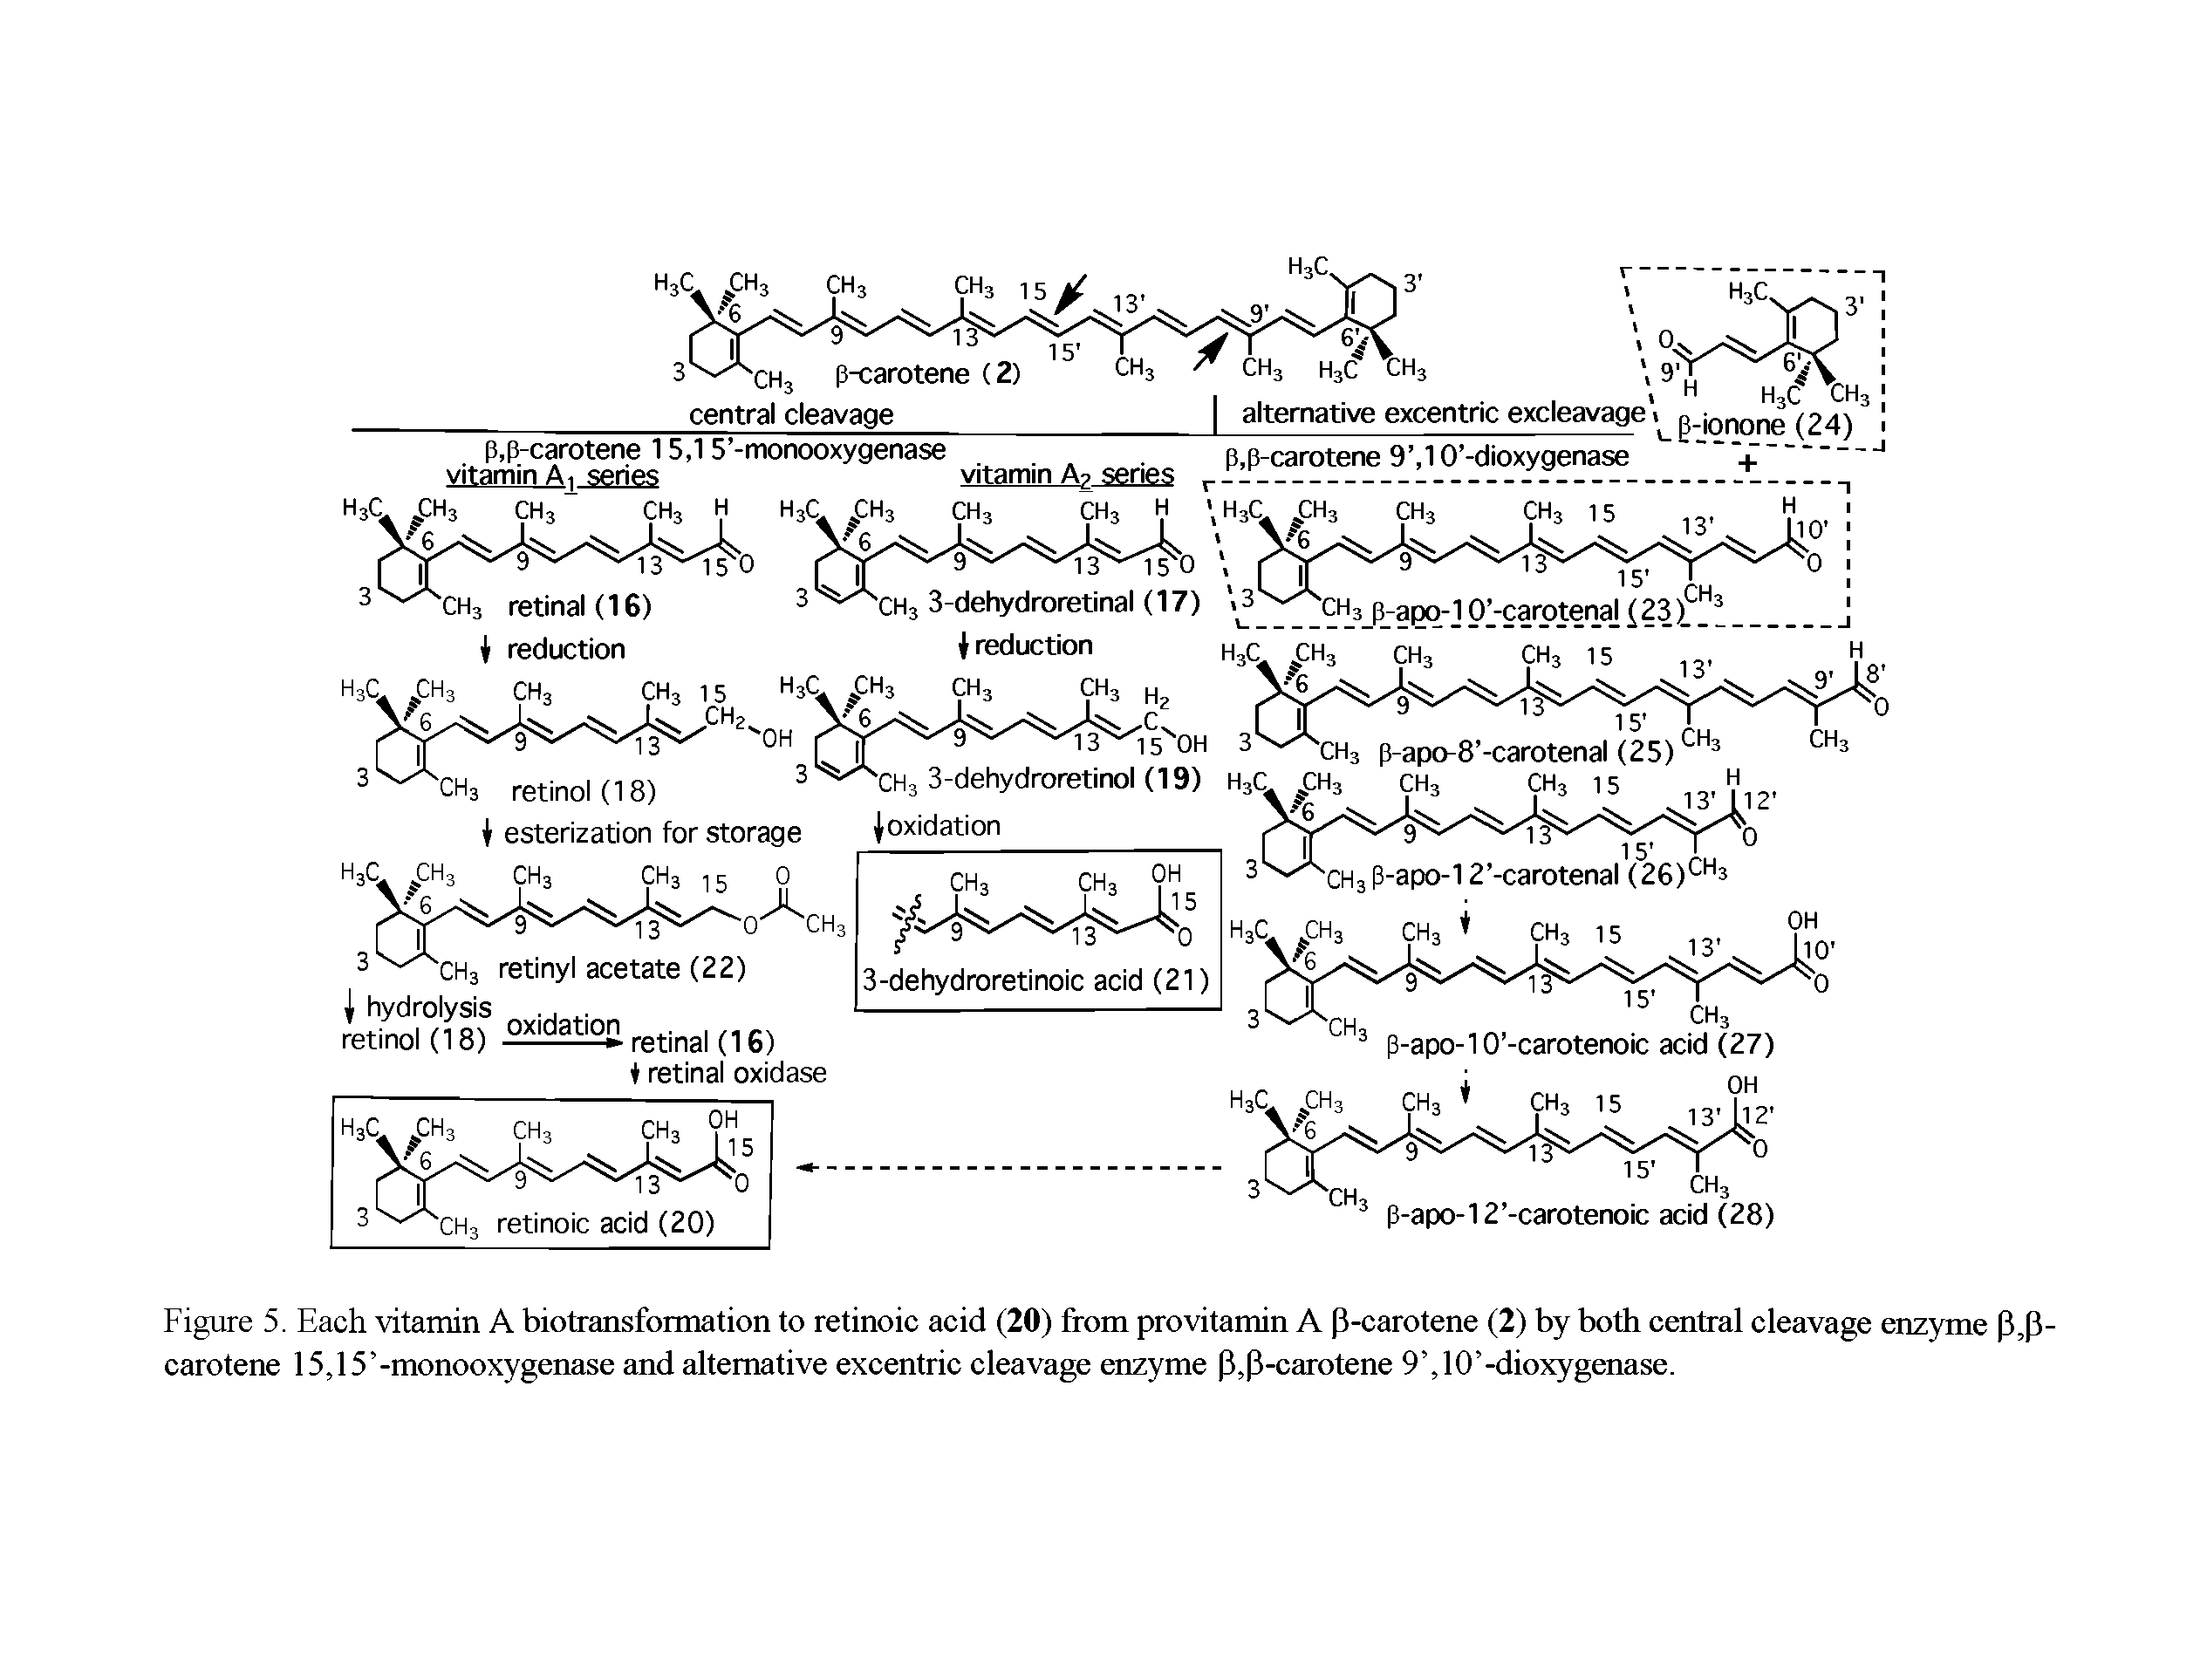 Figure 5. Each vitamin A biotransformation to retinoic acid (20) from provitamin A P-carotene (2) by both central cleavage enzyme P,P-carotene 15,15 -monooxygenase and alternative excentric cleavage enzyme P,P-carotene 9 ,10 -dioxygenase.